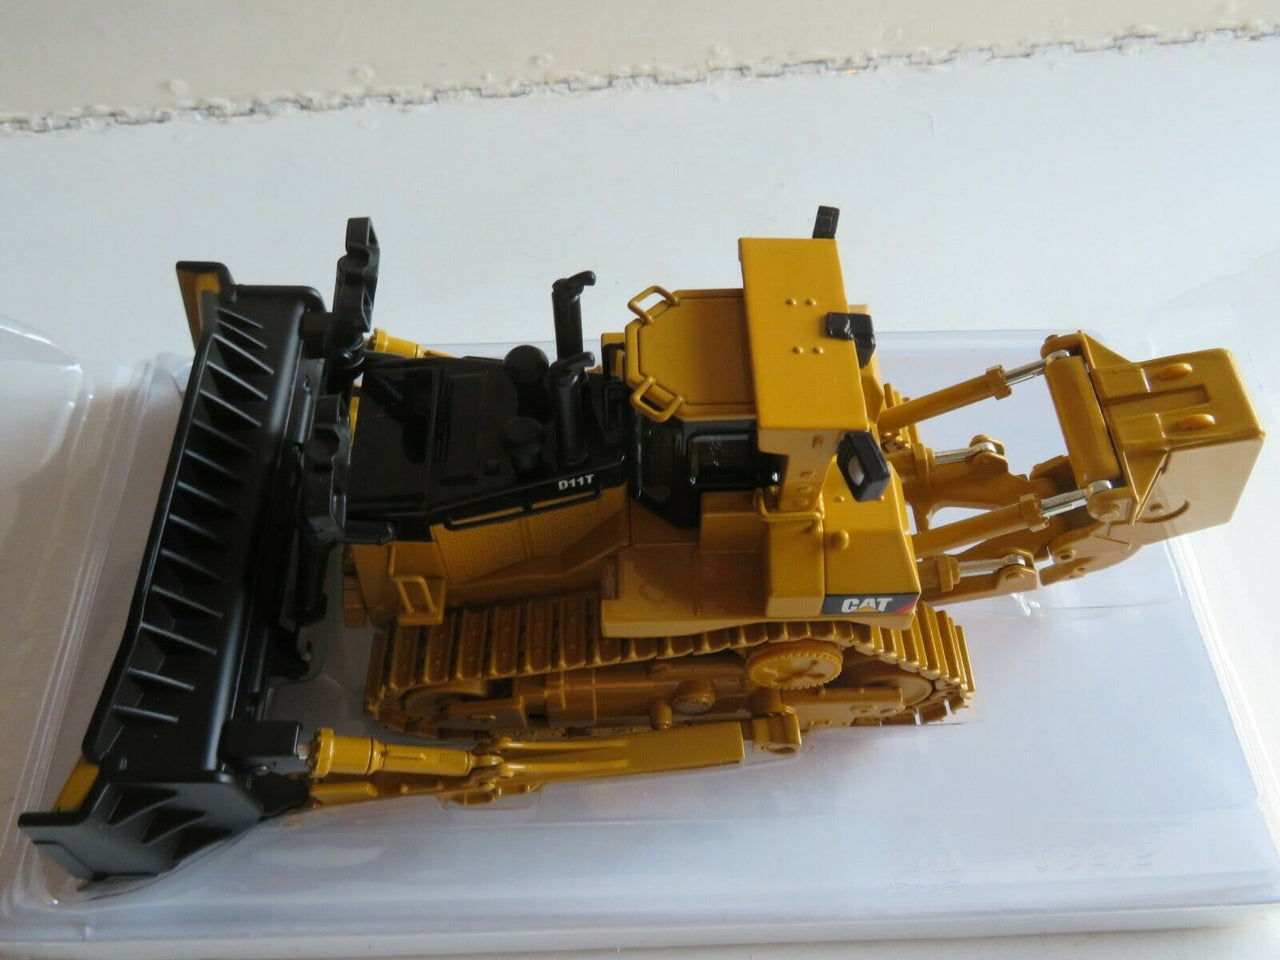 55212 Caterpillar D11T Crawler Tractor Scale 1:50 (Discontinued Model)